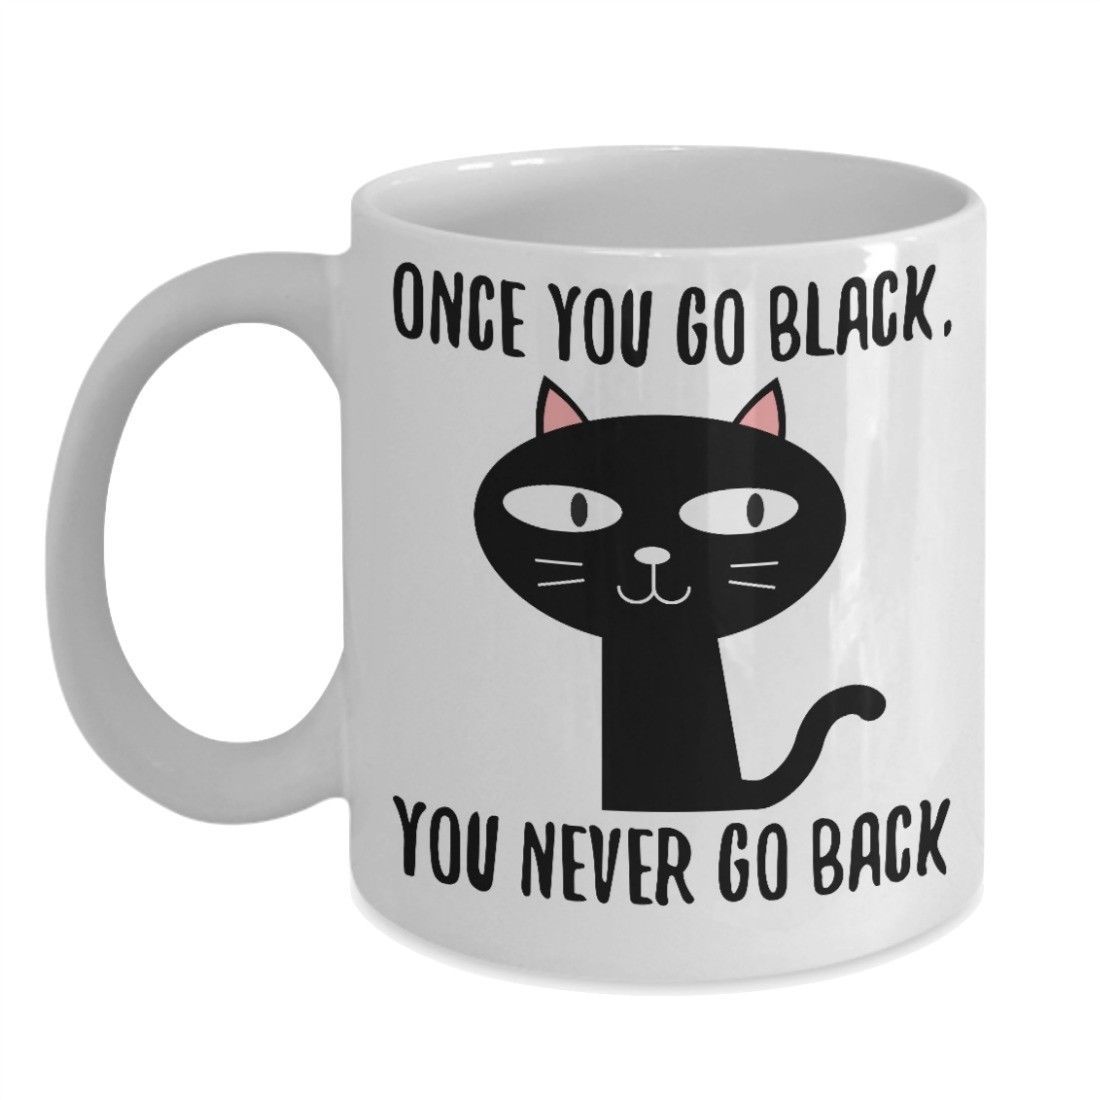 Funny Black Cat Lover Gift Once You Go Black You Never Go Back Cute Coffee Mug - $19.55 - $22.49